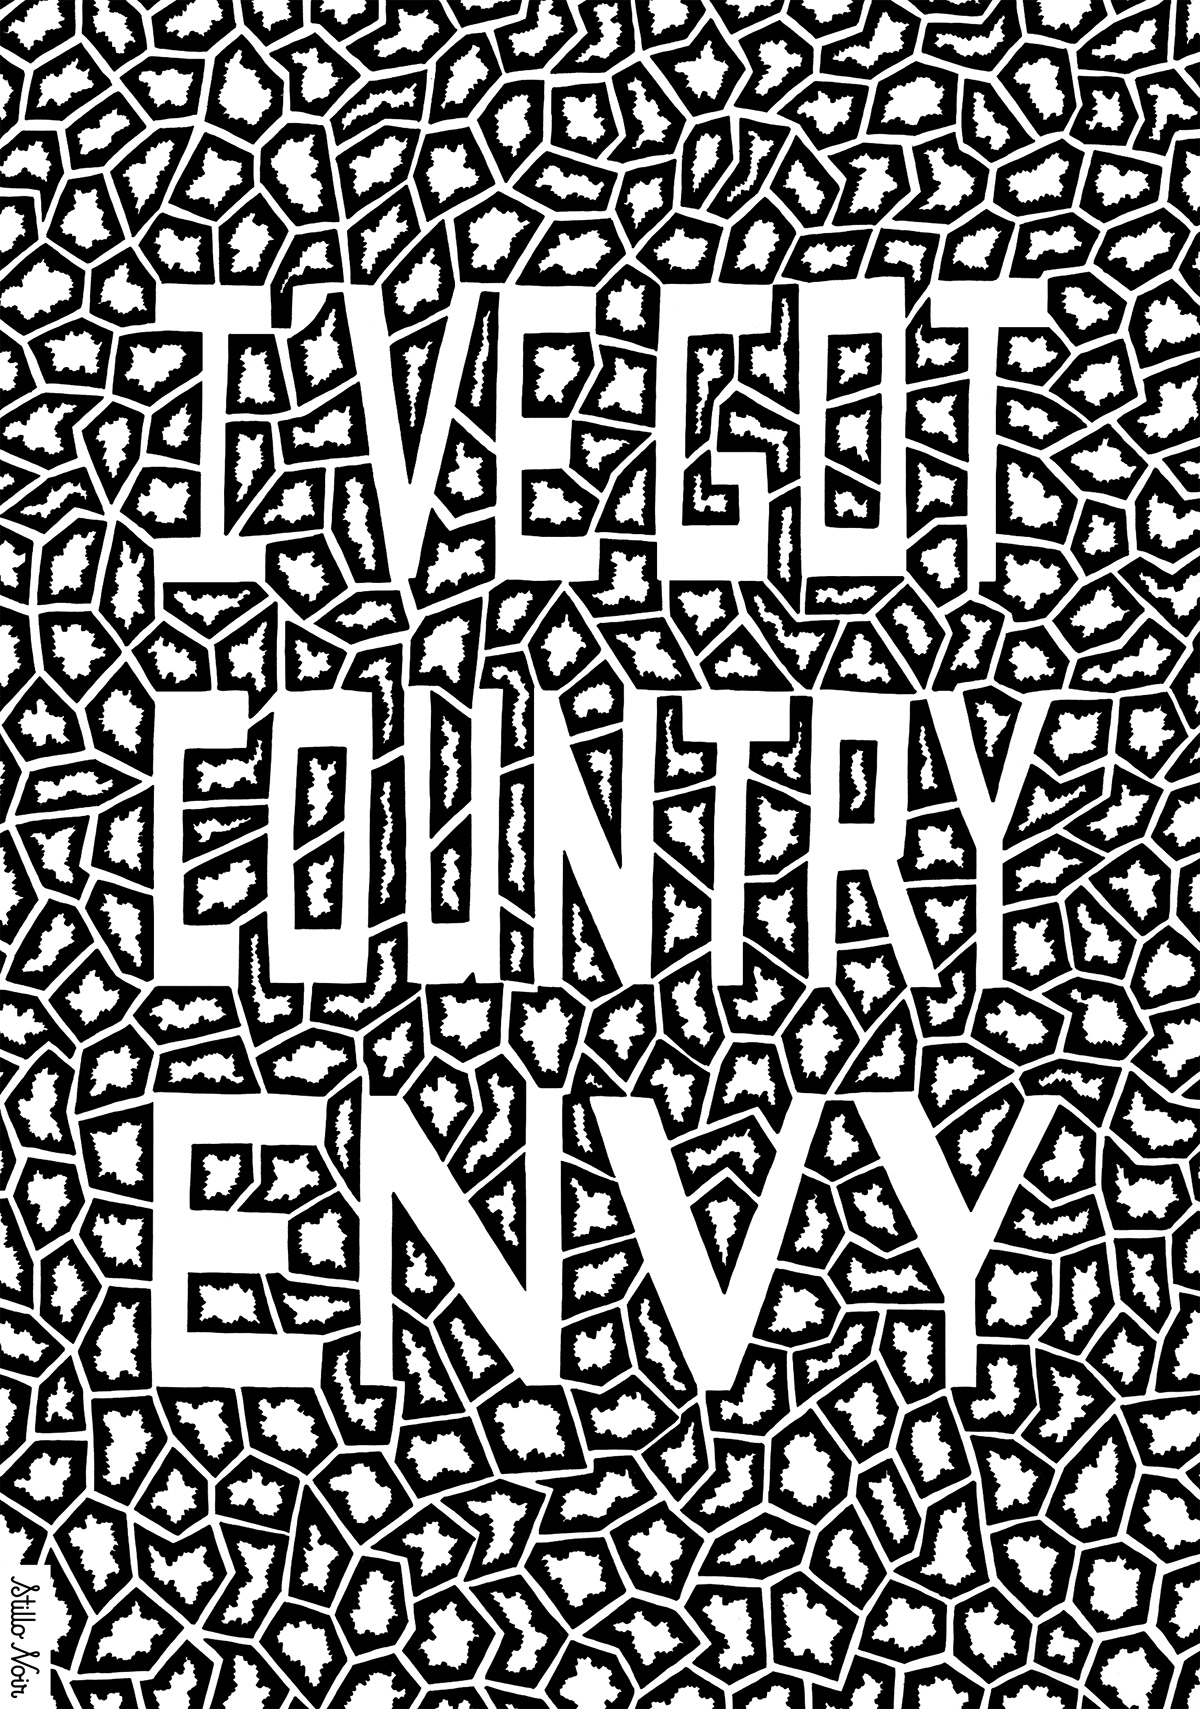 A hand-lettered black and white phrase surrounded by a geometric abstract pattern of dried earth